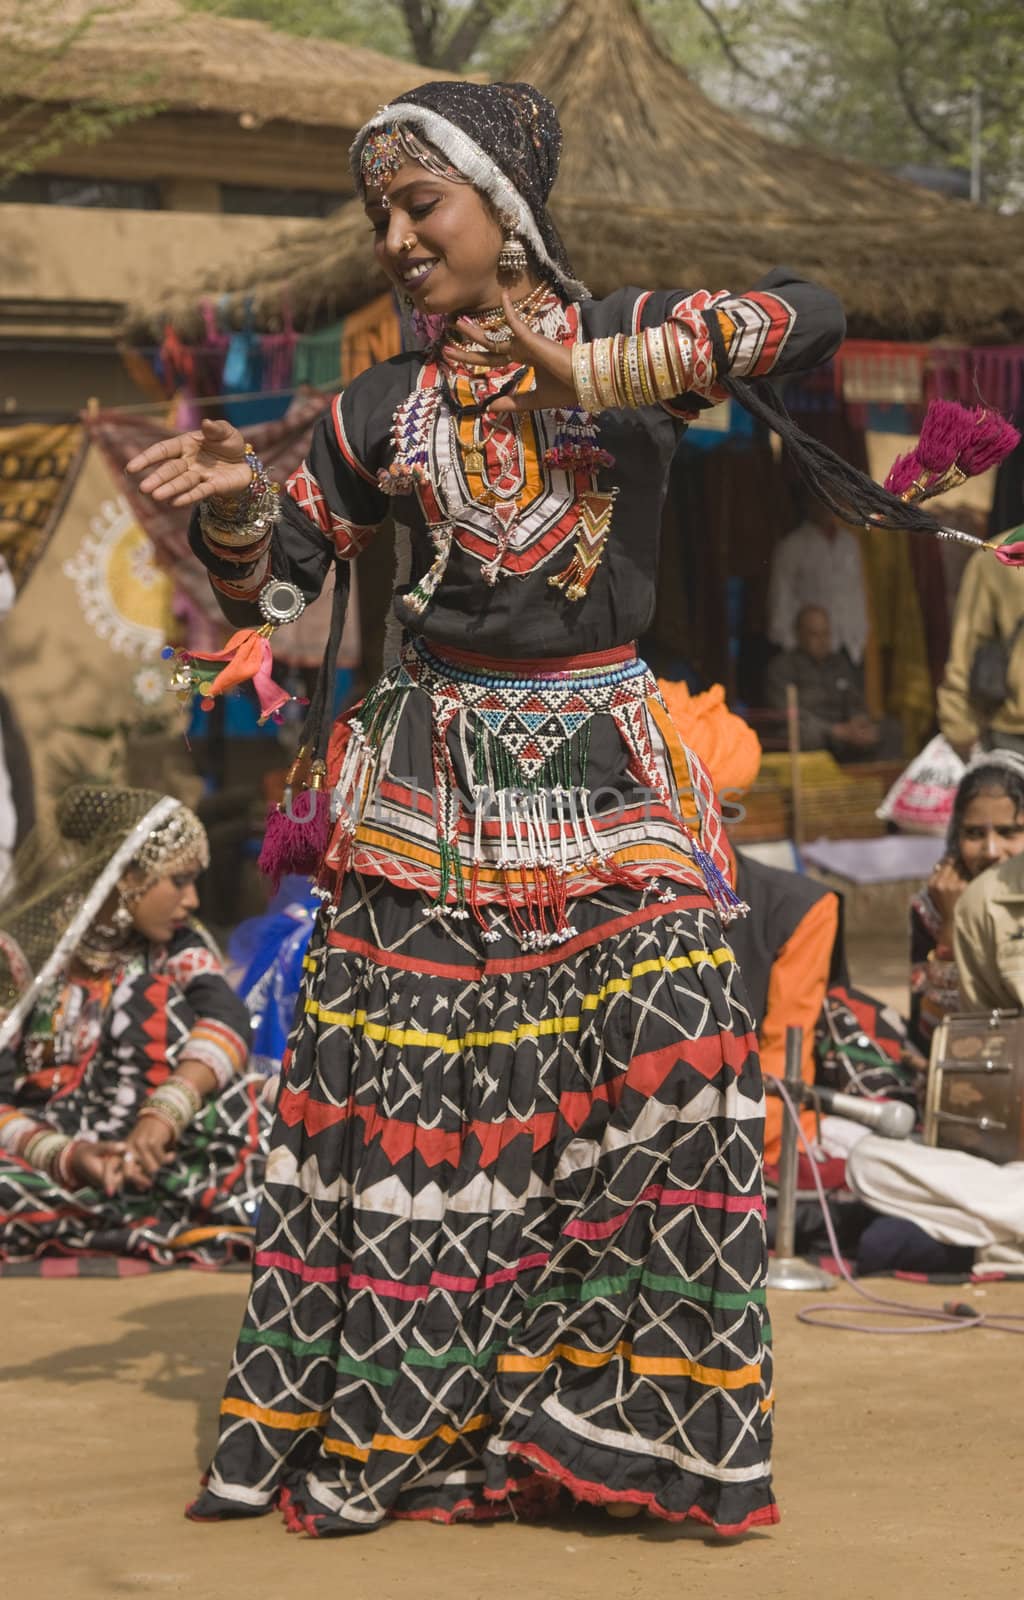 Rajasthani dancer in ornate black costume trimmed with beads and sequins performing at the Sarujkund Fair near Delhi in India.